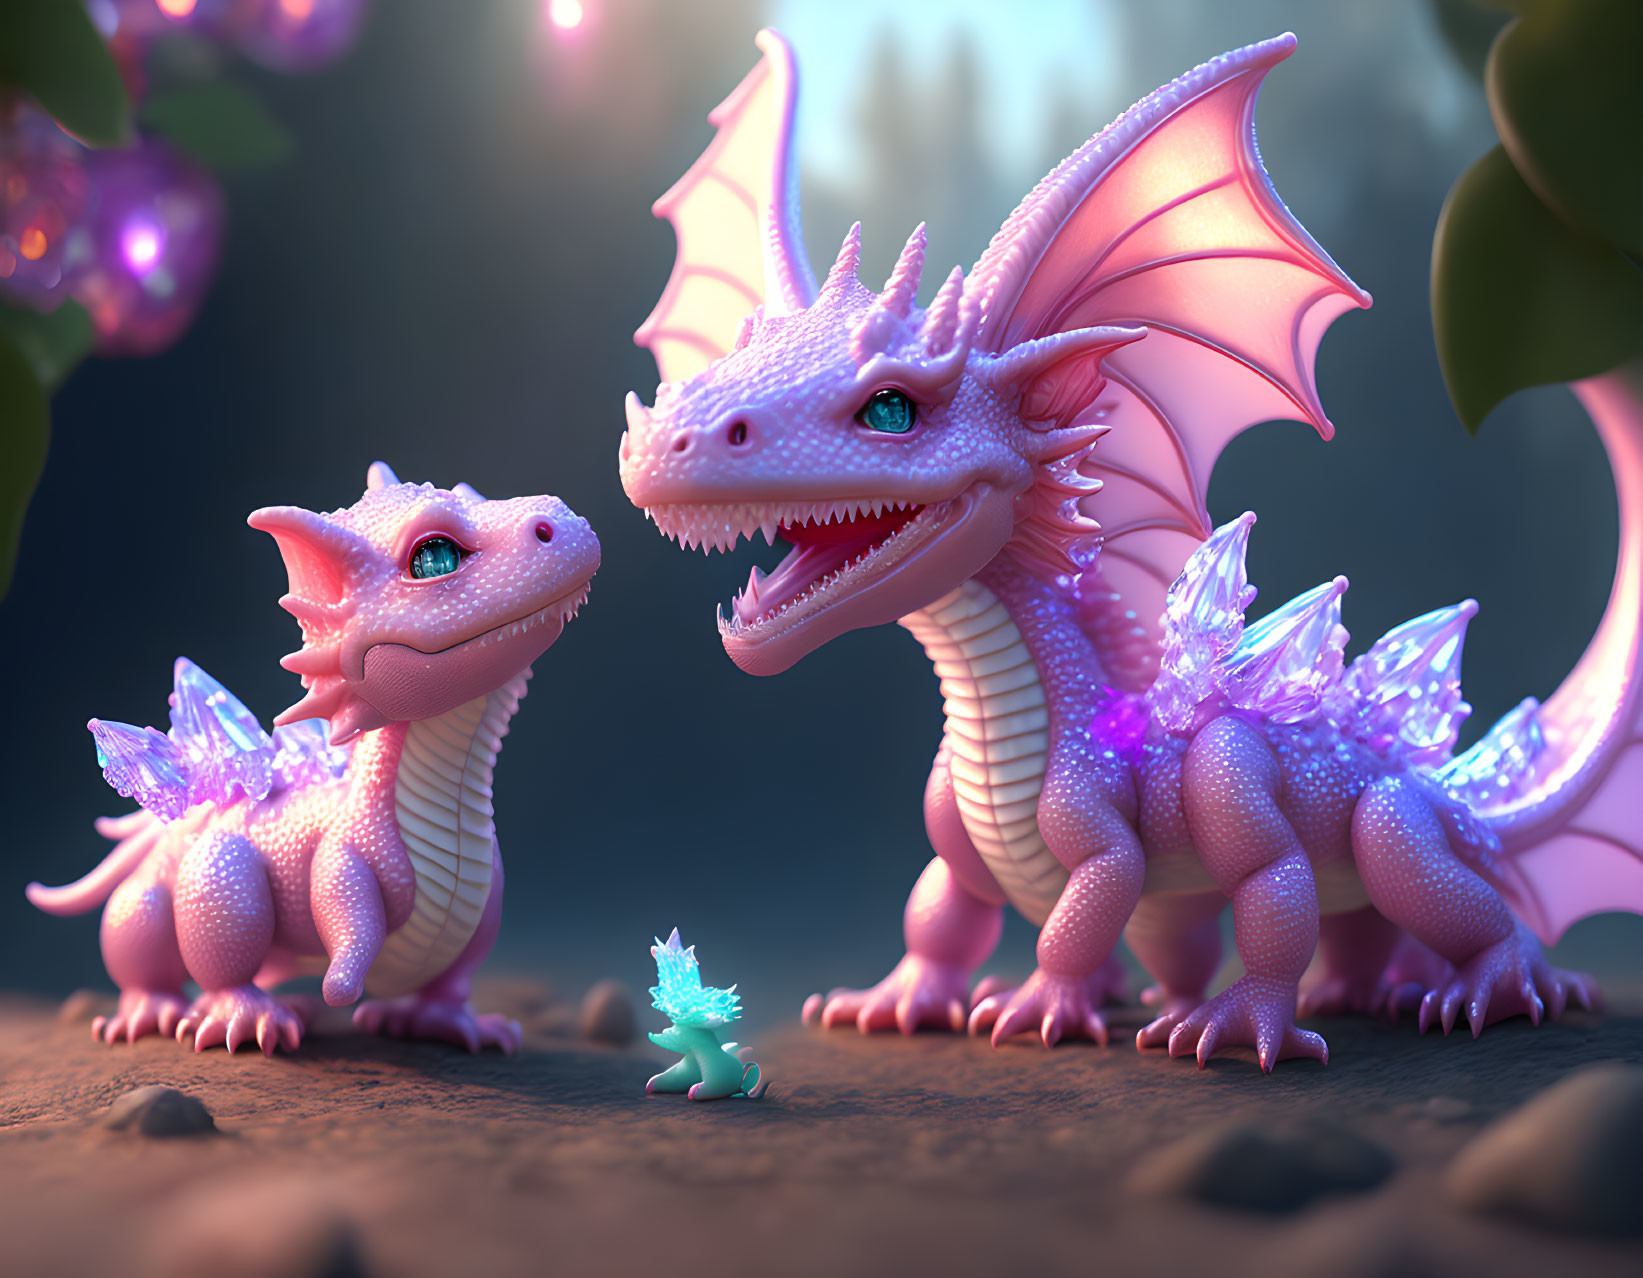 Three stylized dragons with iridescent scales and pink wings in mystical forest scene